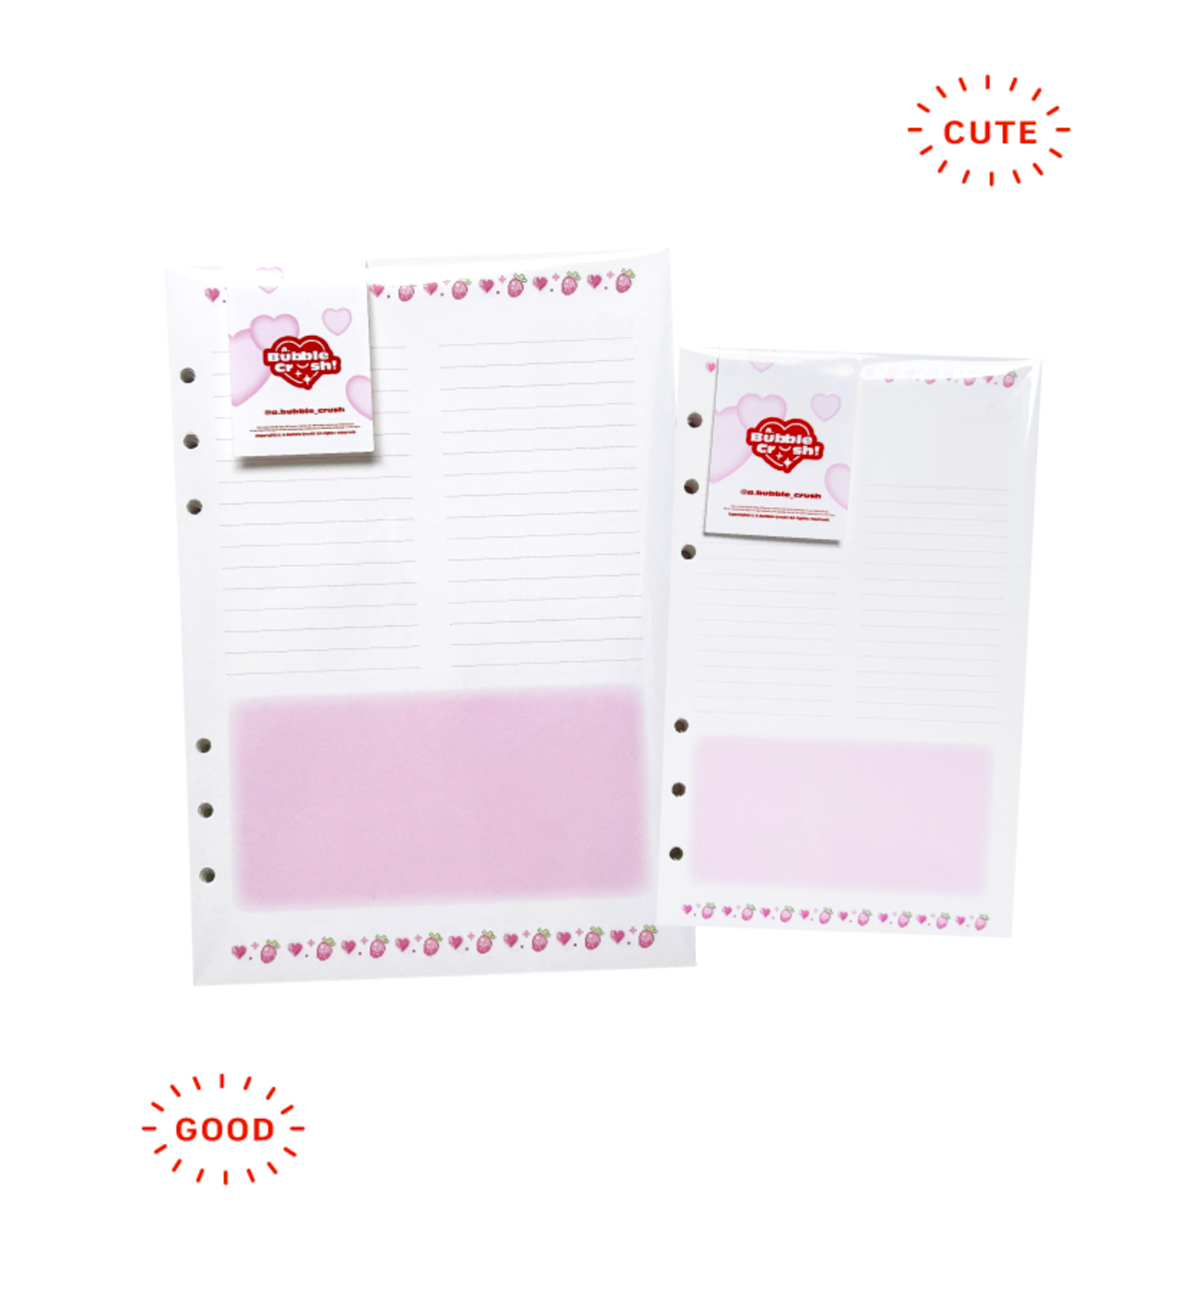 A6 Strawberry Pixel Paper Refill